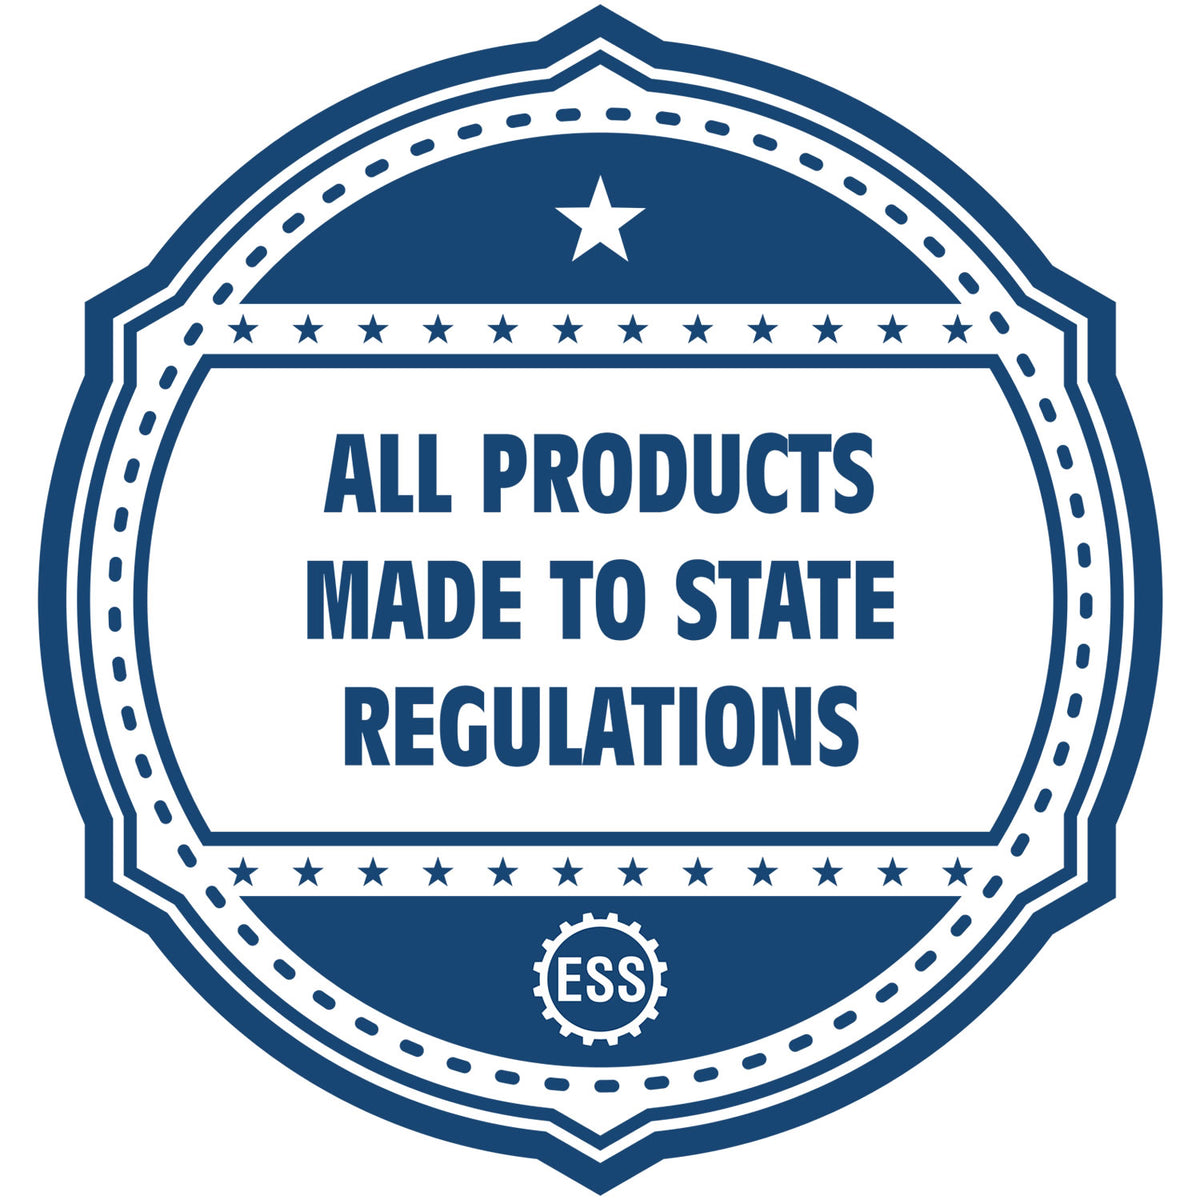 An icon or badge element for the State of Washington Soft Land Surveyor Embossing Seal showing that this product is made in compliance with state regulations.